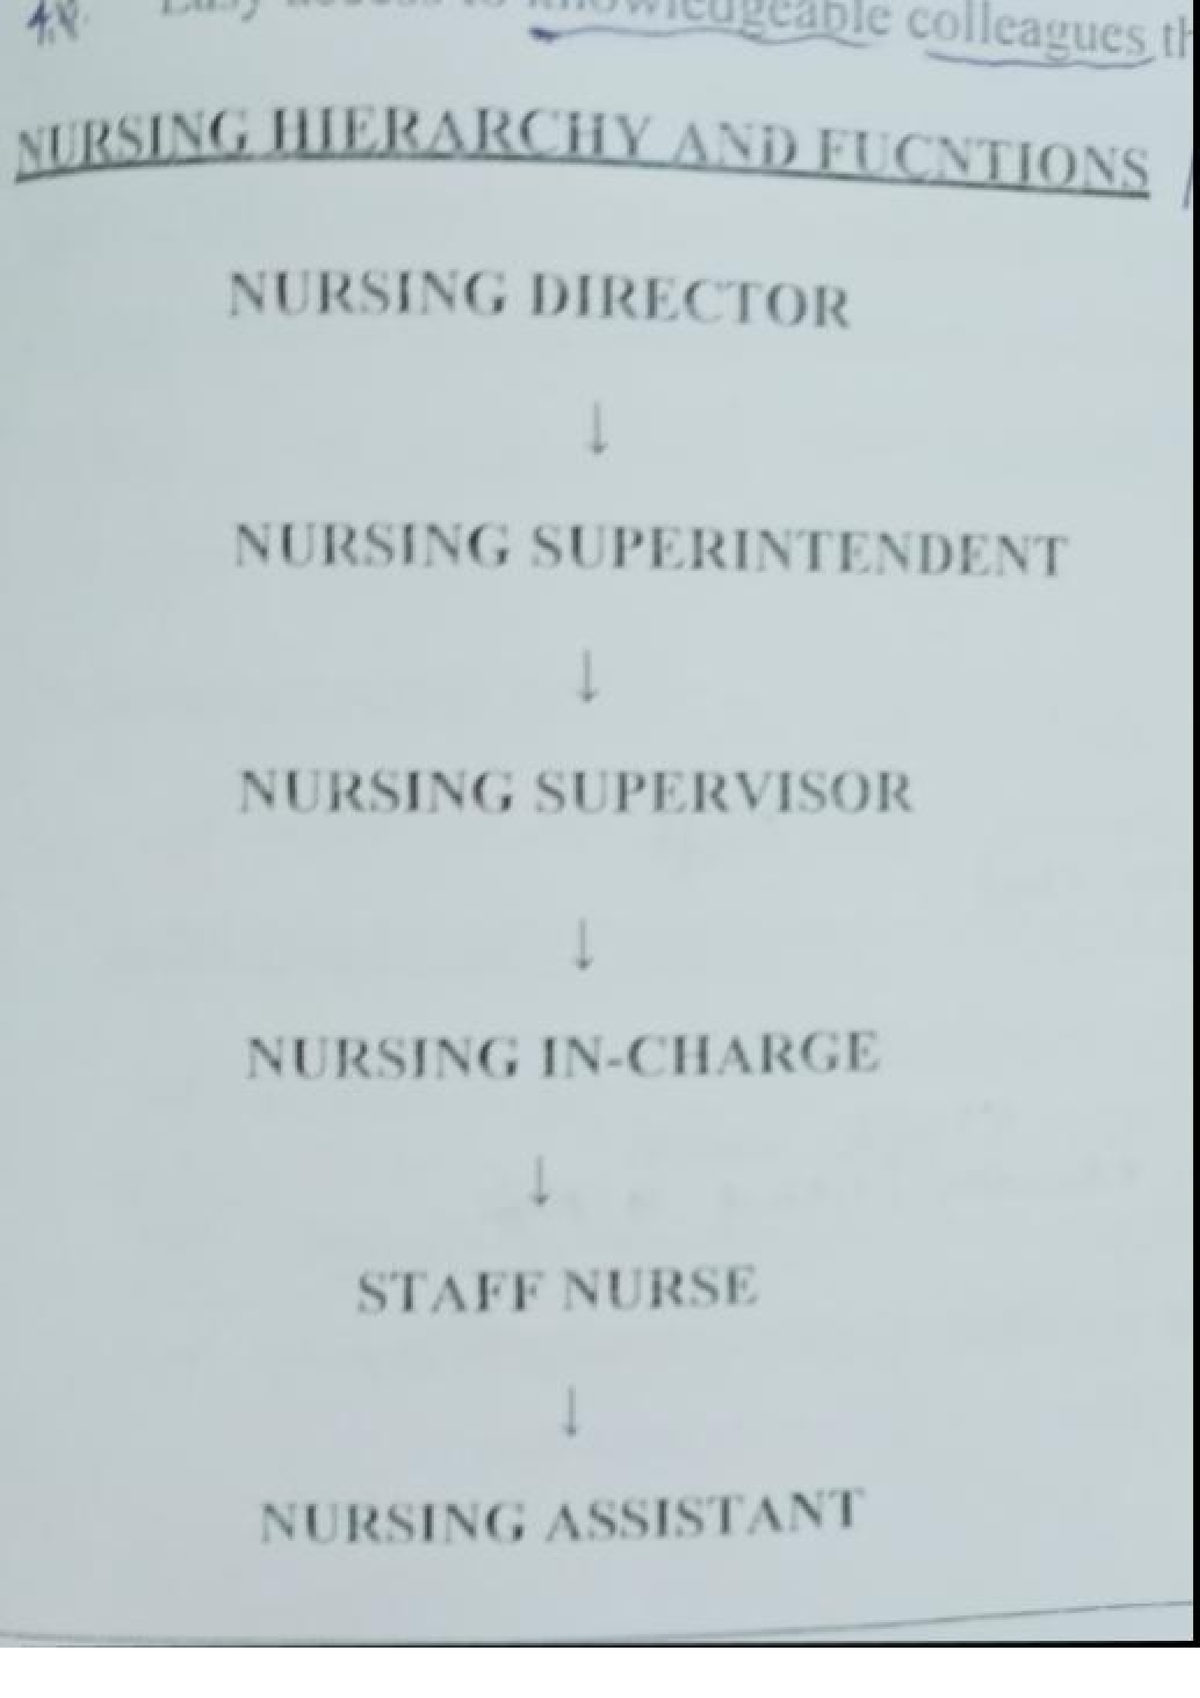 Nursing Hierarchy And Functions Hospital Management Science Studocu